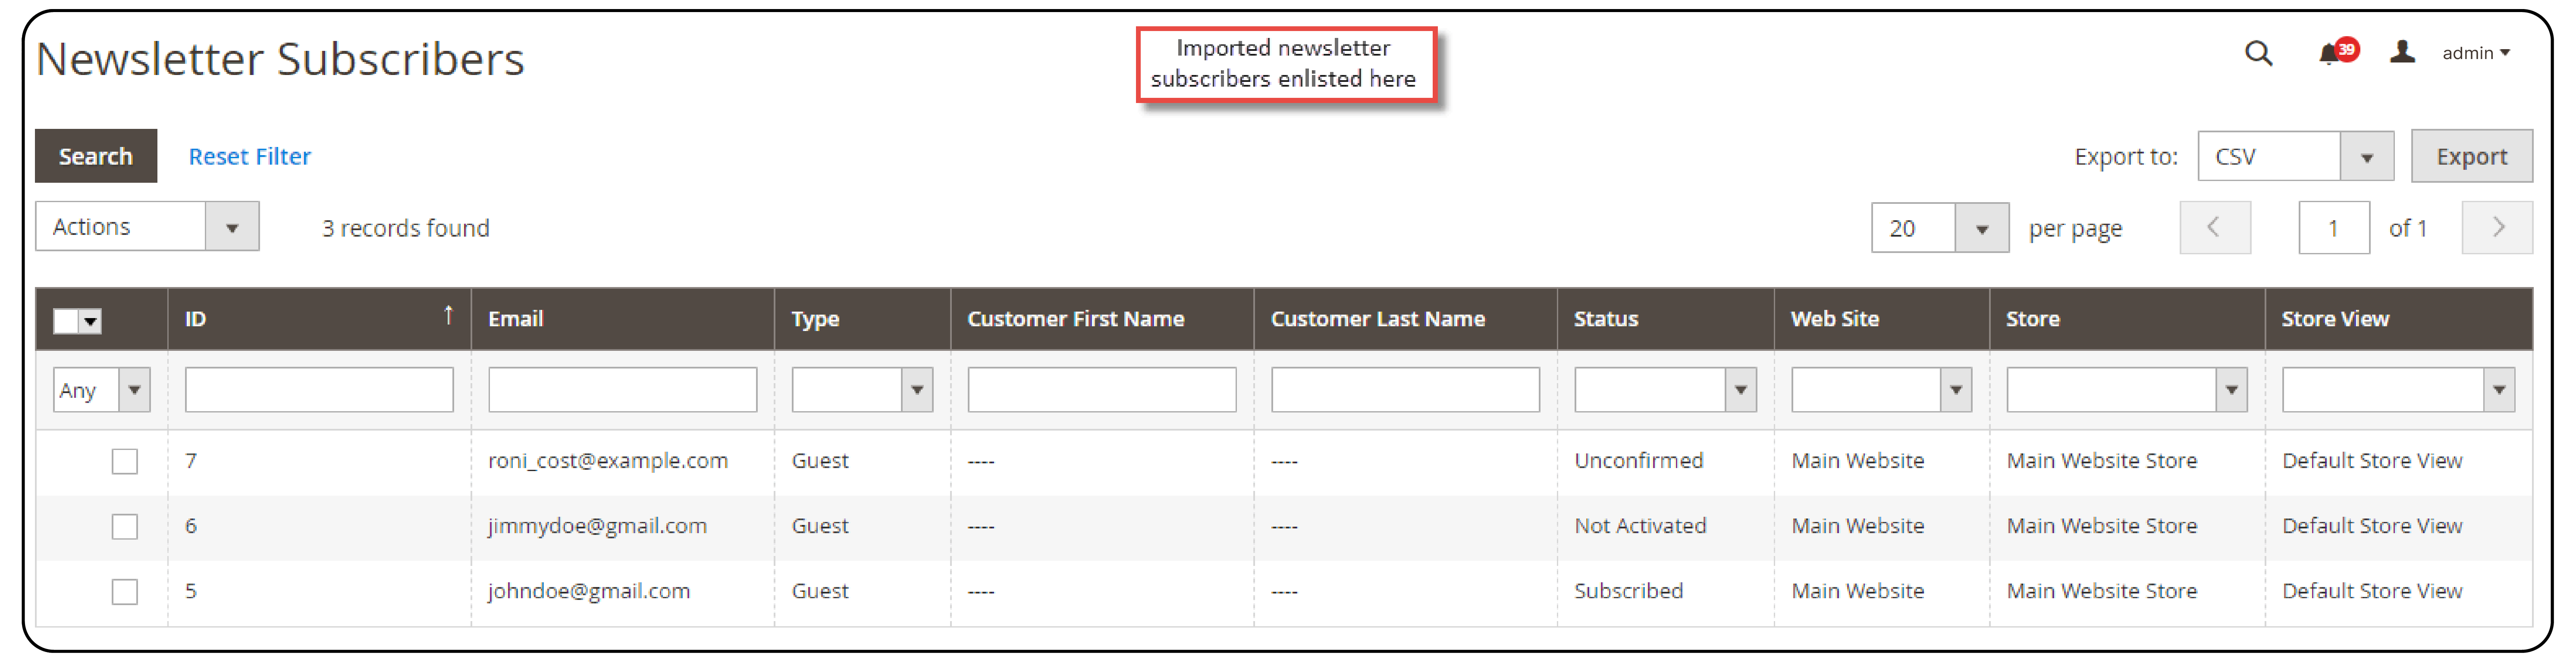 Magento 2 Import Export Newsletter Subscribers Extension subscriber list